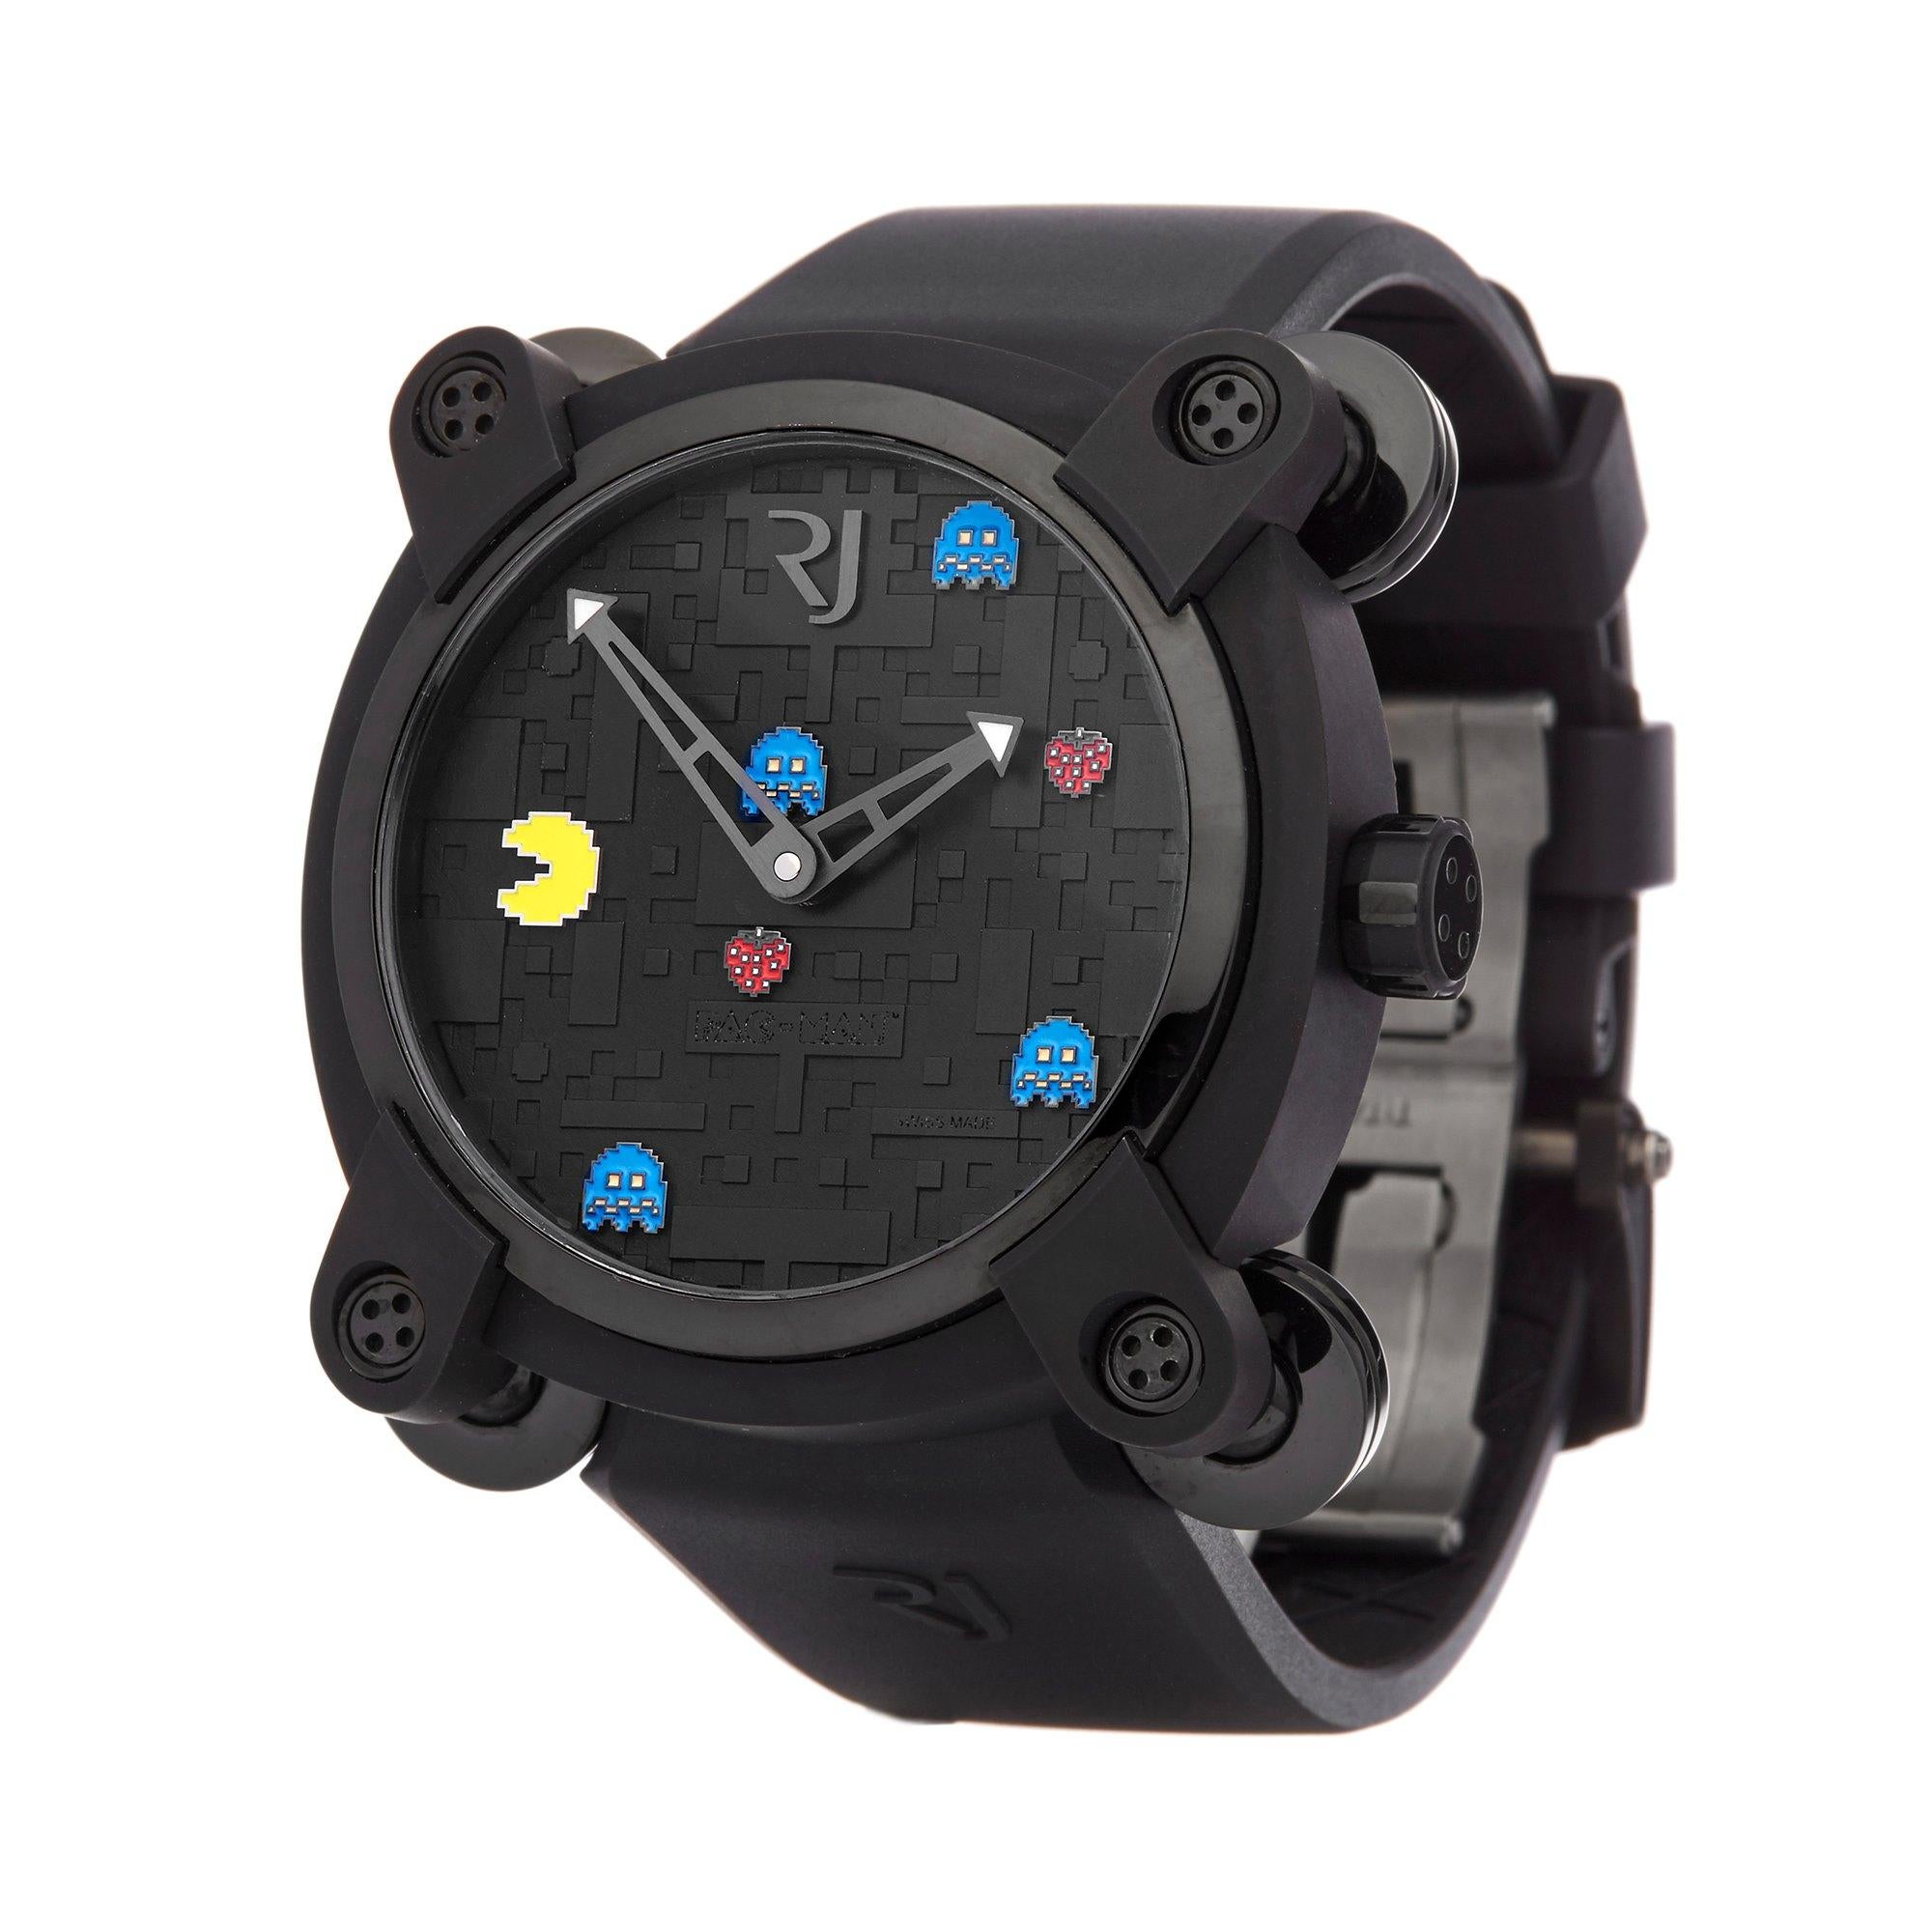 Xupes Reference: COM002491
Manufacturer: Romaine Jerome
Model: Pac Man Level 2
Model Variant: 0
Model Number: Ti RJ.M.AU.009.05
Age: 42075
Gender: Men
Complete With: Romaine Jerome Box, Manual, Guarantee & RJ USB Pen
Dial: Black  Other
Glass: